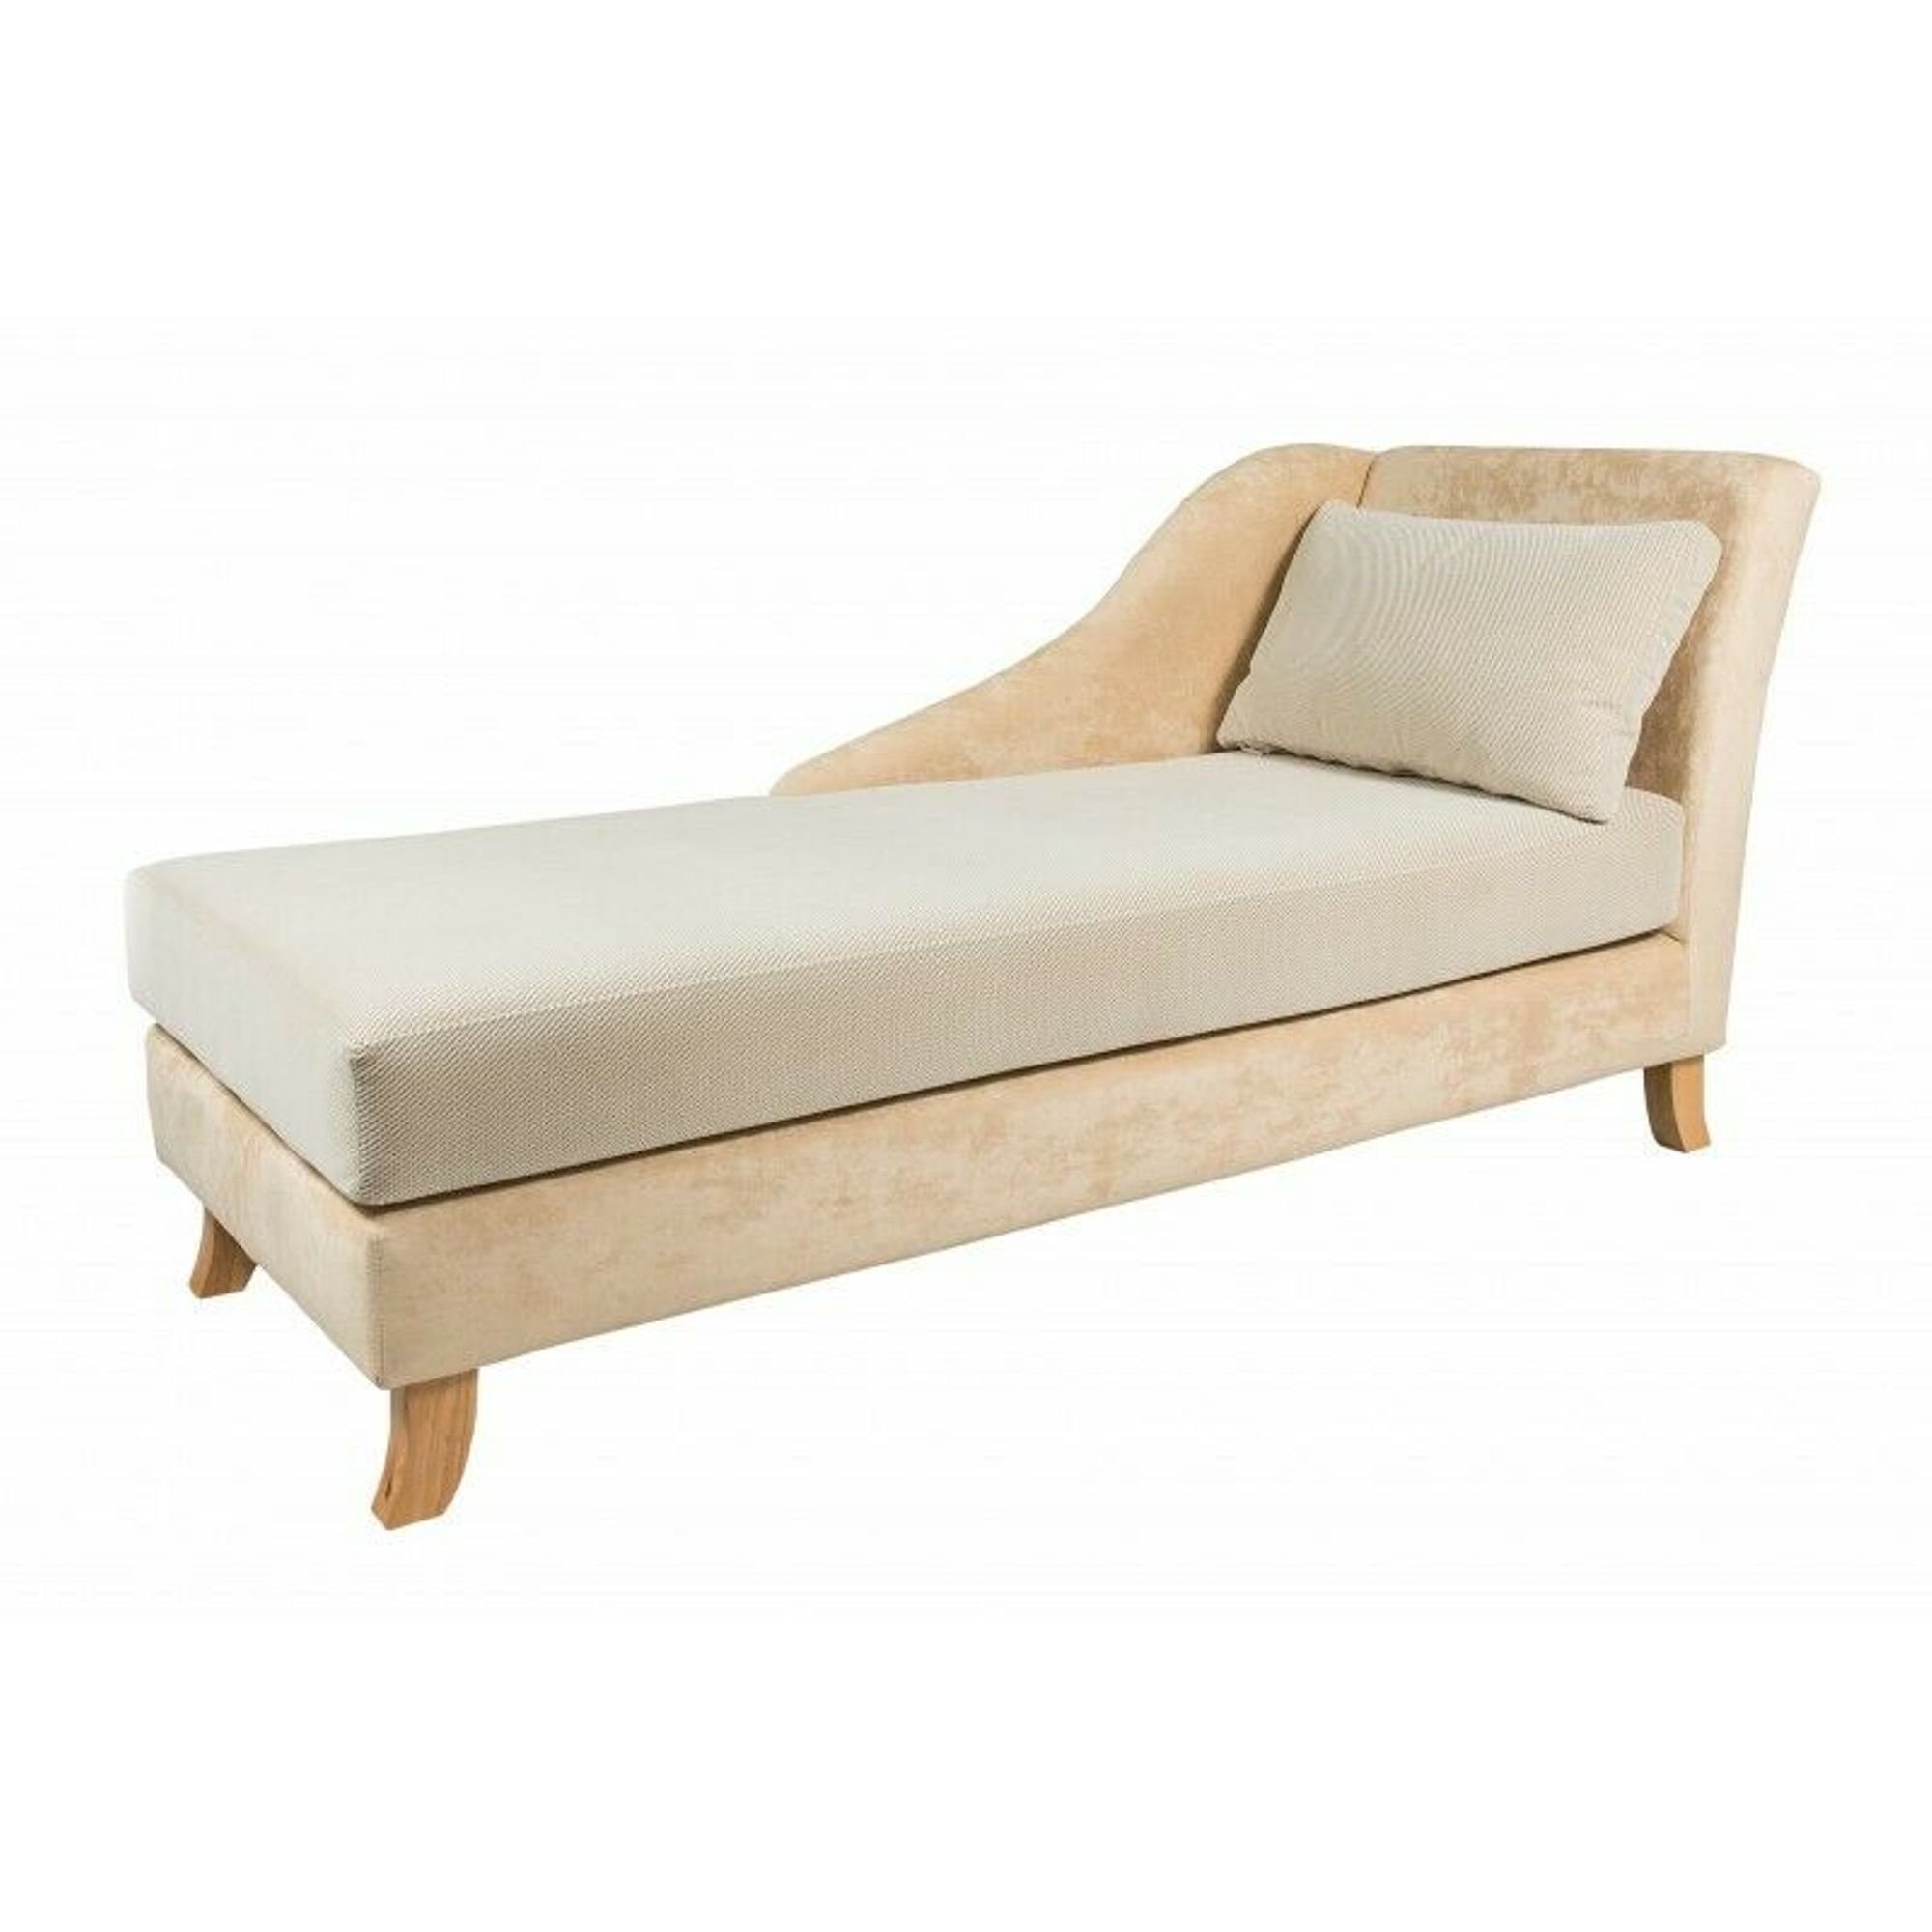 JVmoebel Chaiselongue Chaiselongue Chaiselongues Stoff Sofa Liege Chaise Club Relax, Made in Europe